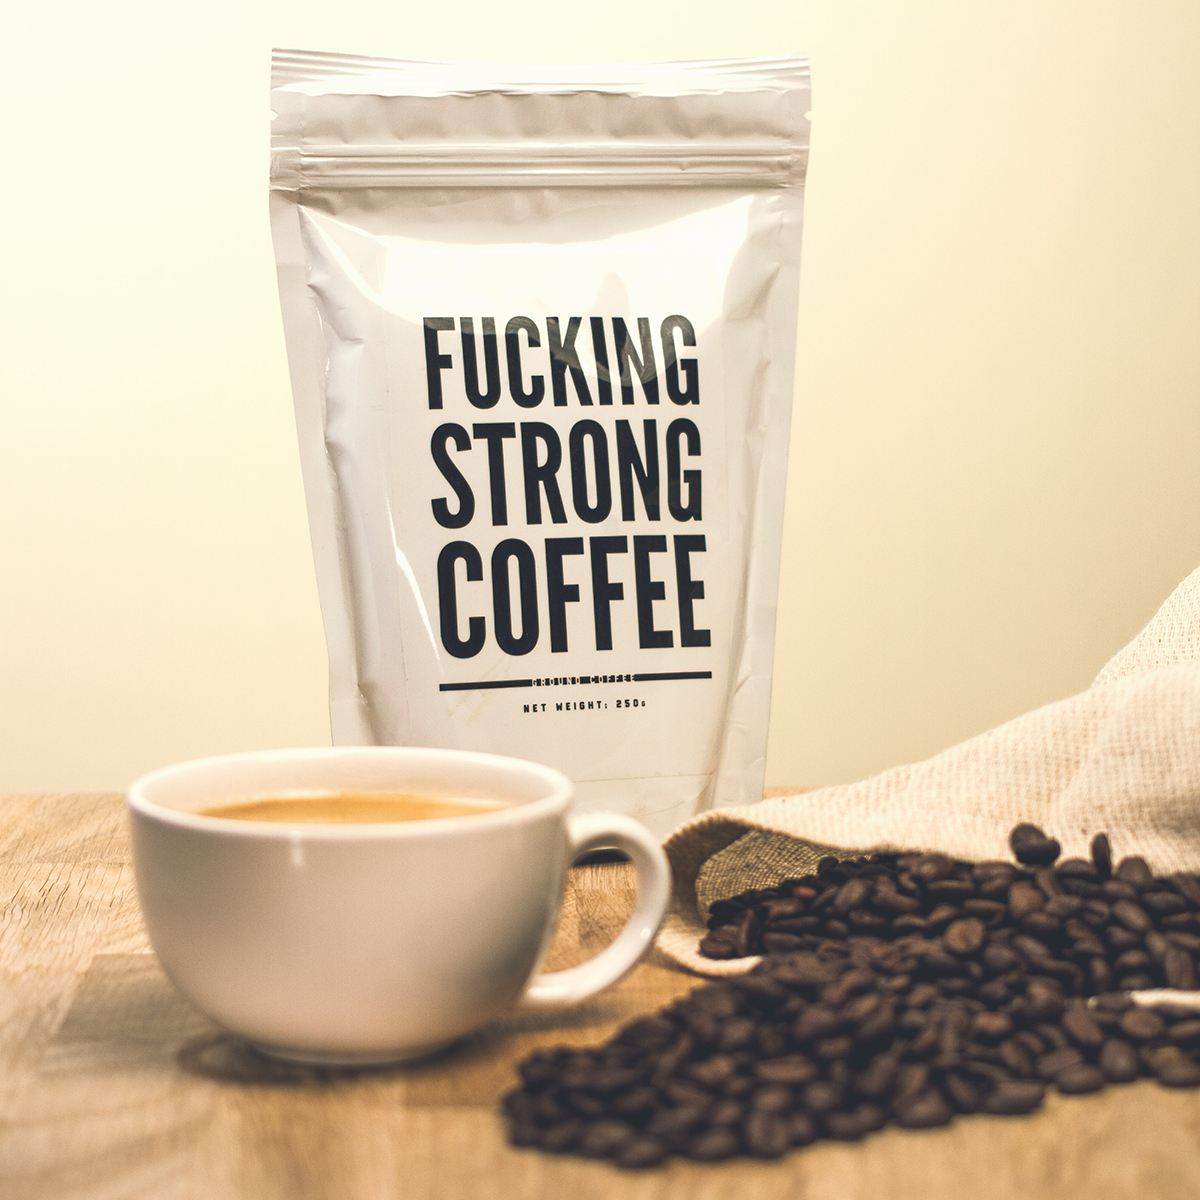 F*cking Strong Coffee.